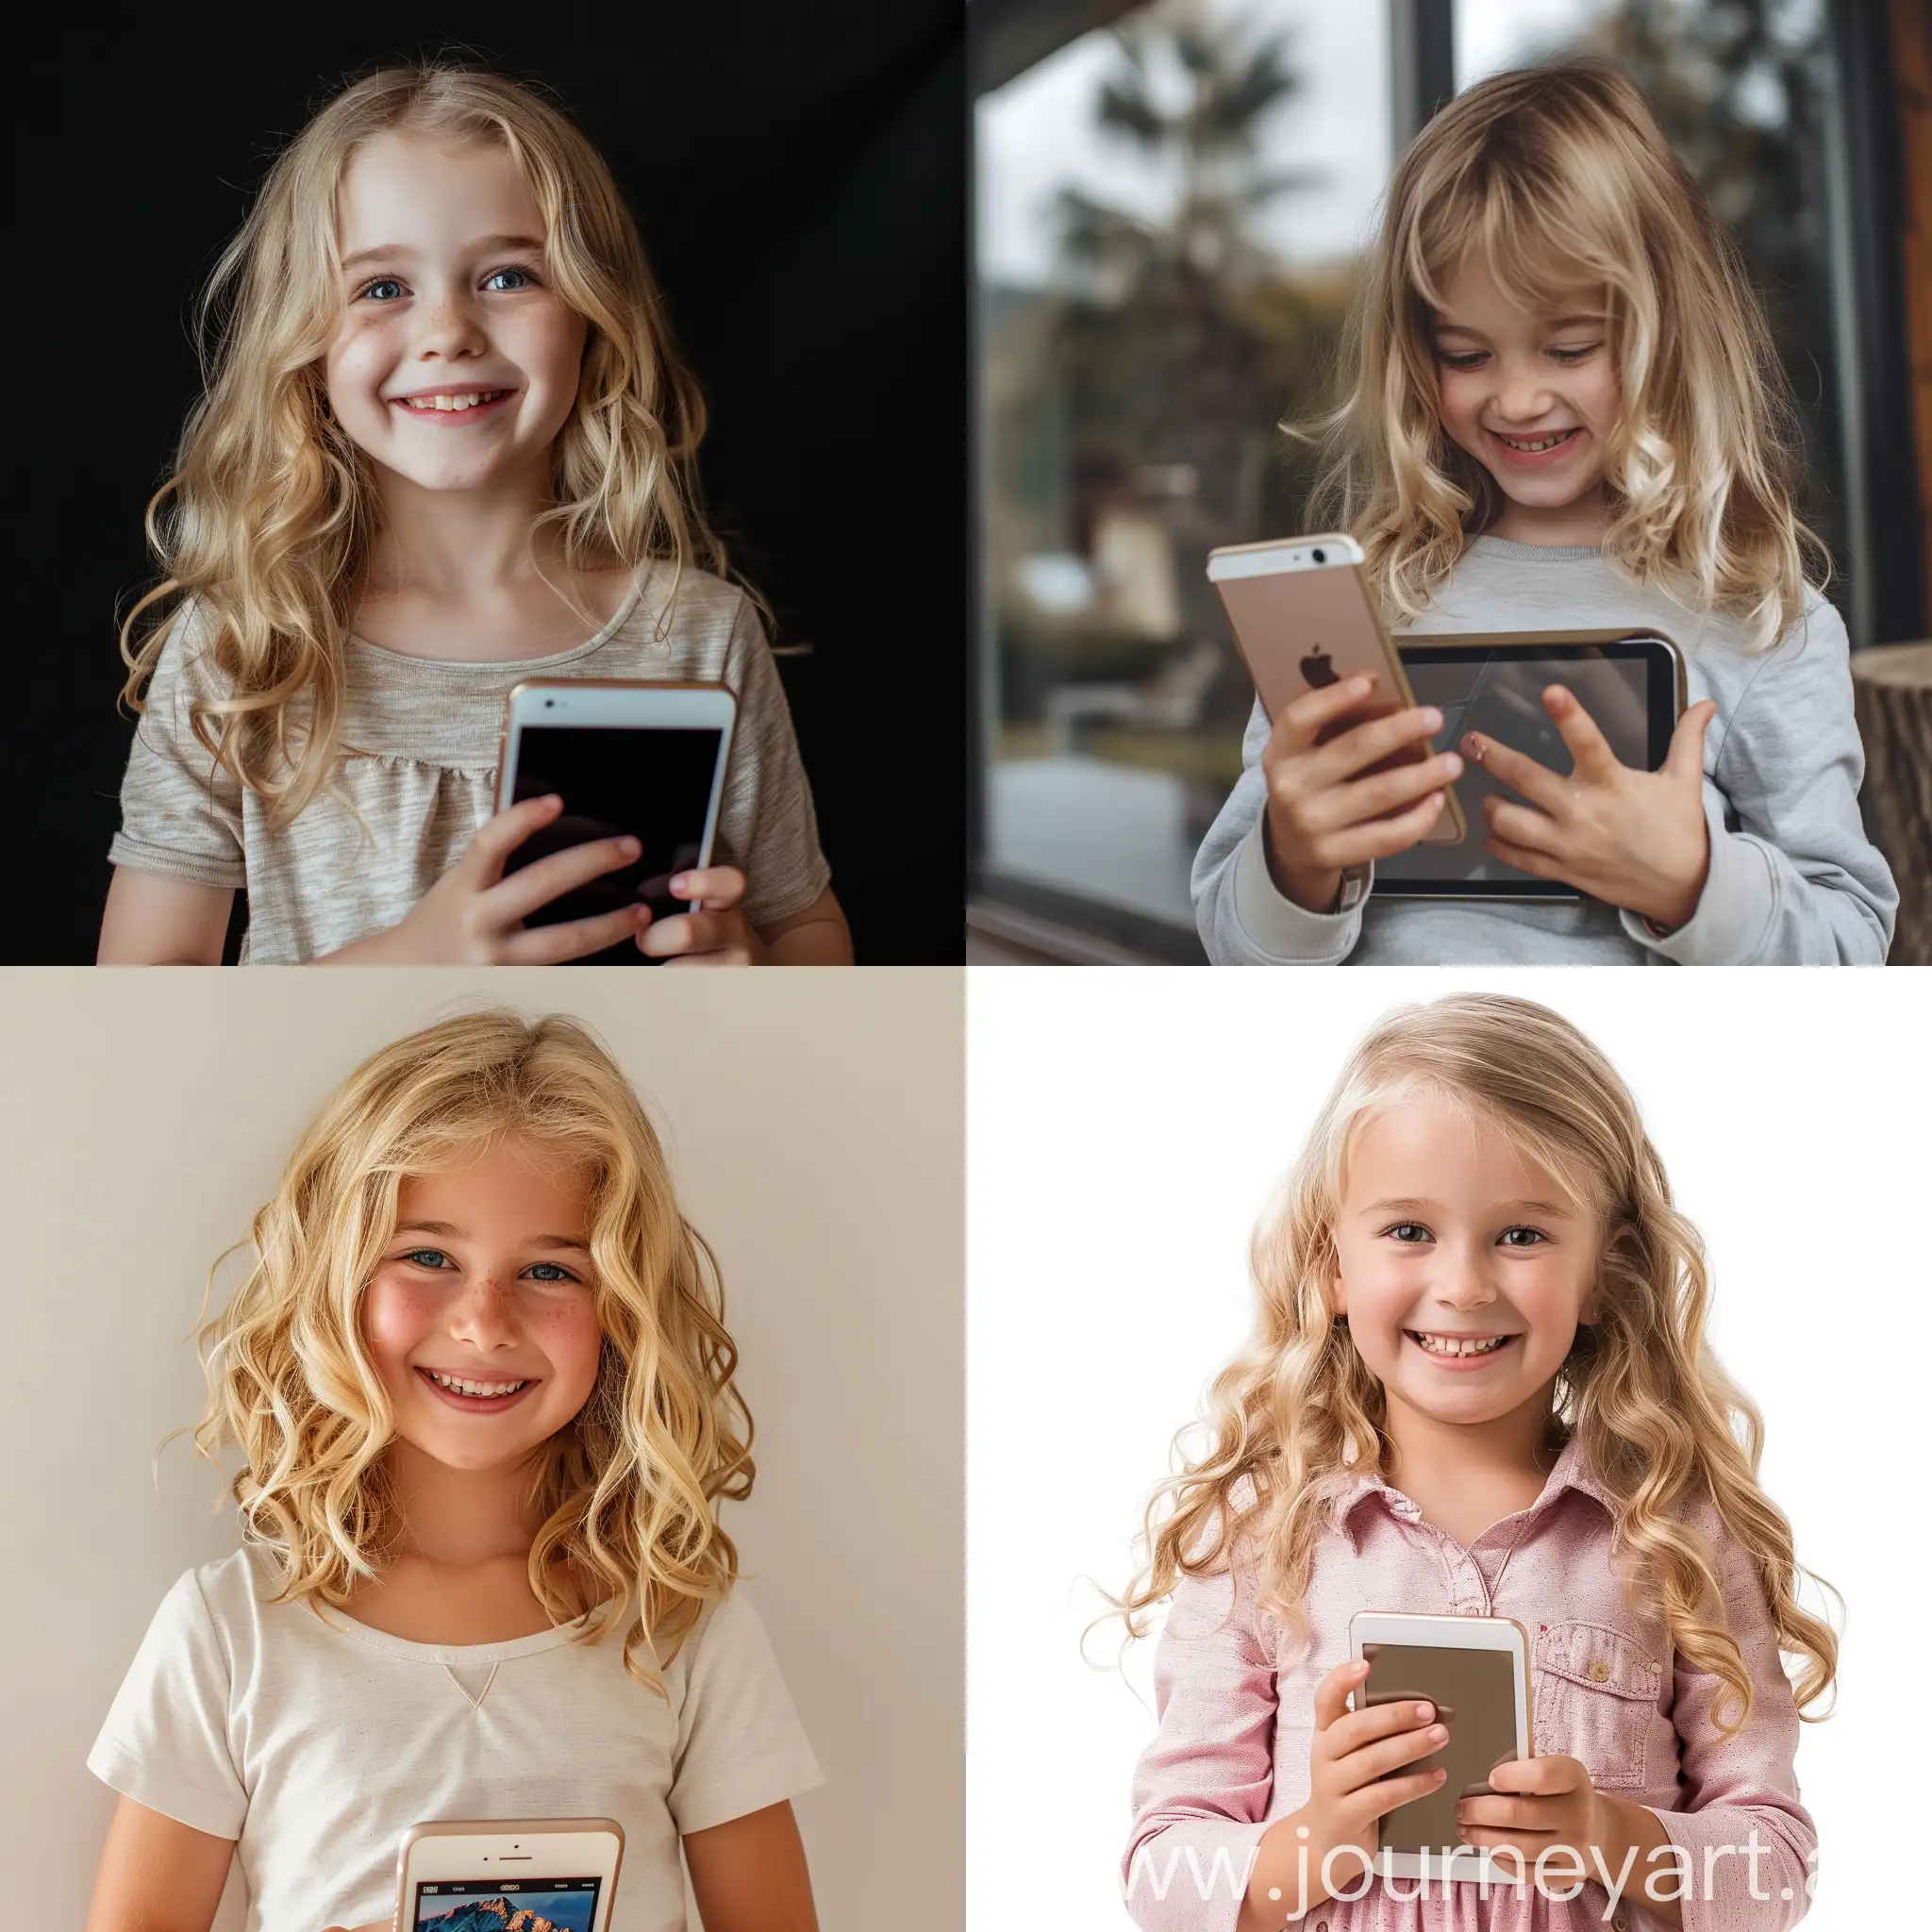 Cheerful-Young-Girl-with-Blonde-Hair-Using-Phone-and-iPad